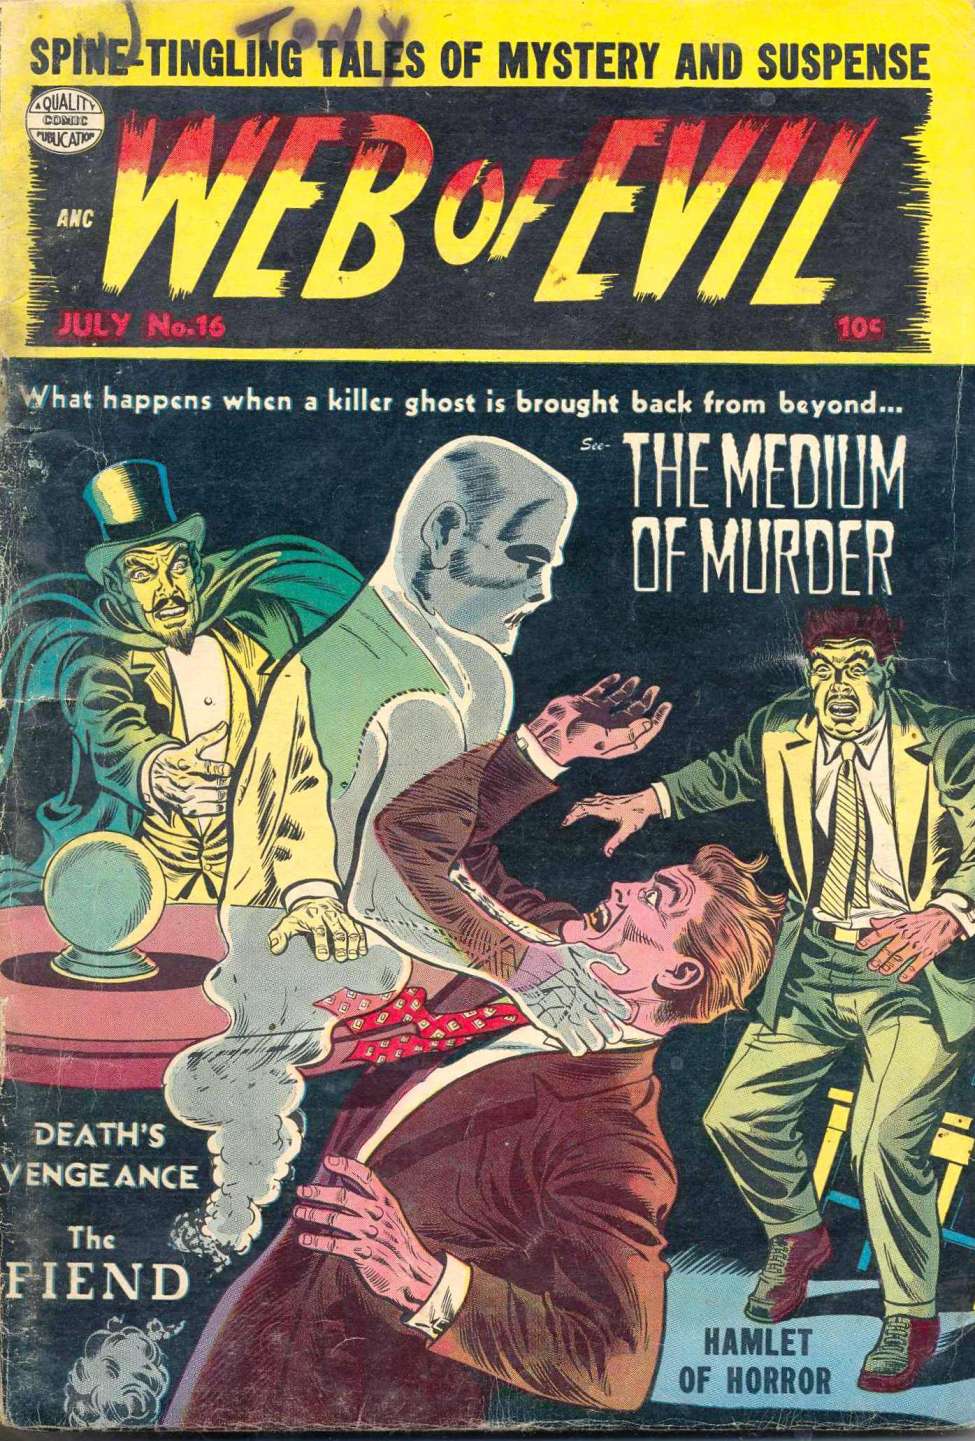 Comic Book Cover For Web of Evil 16